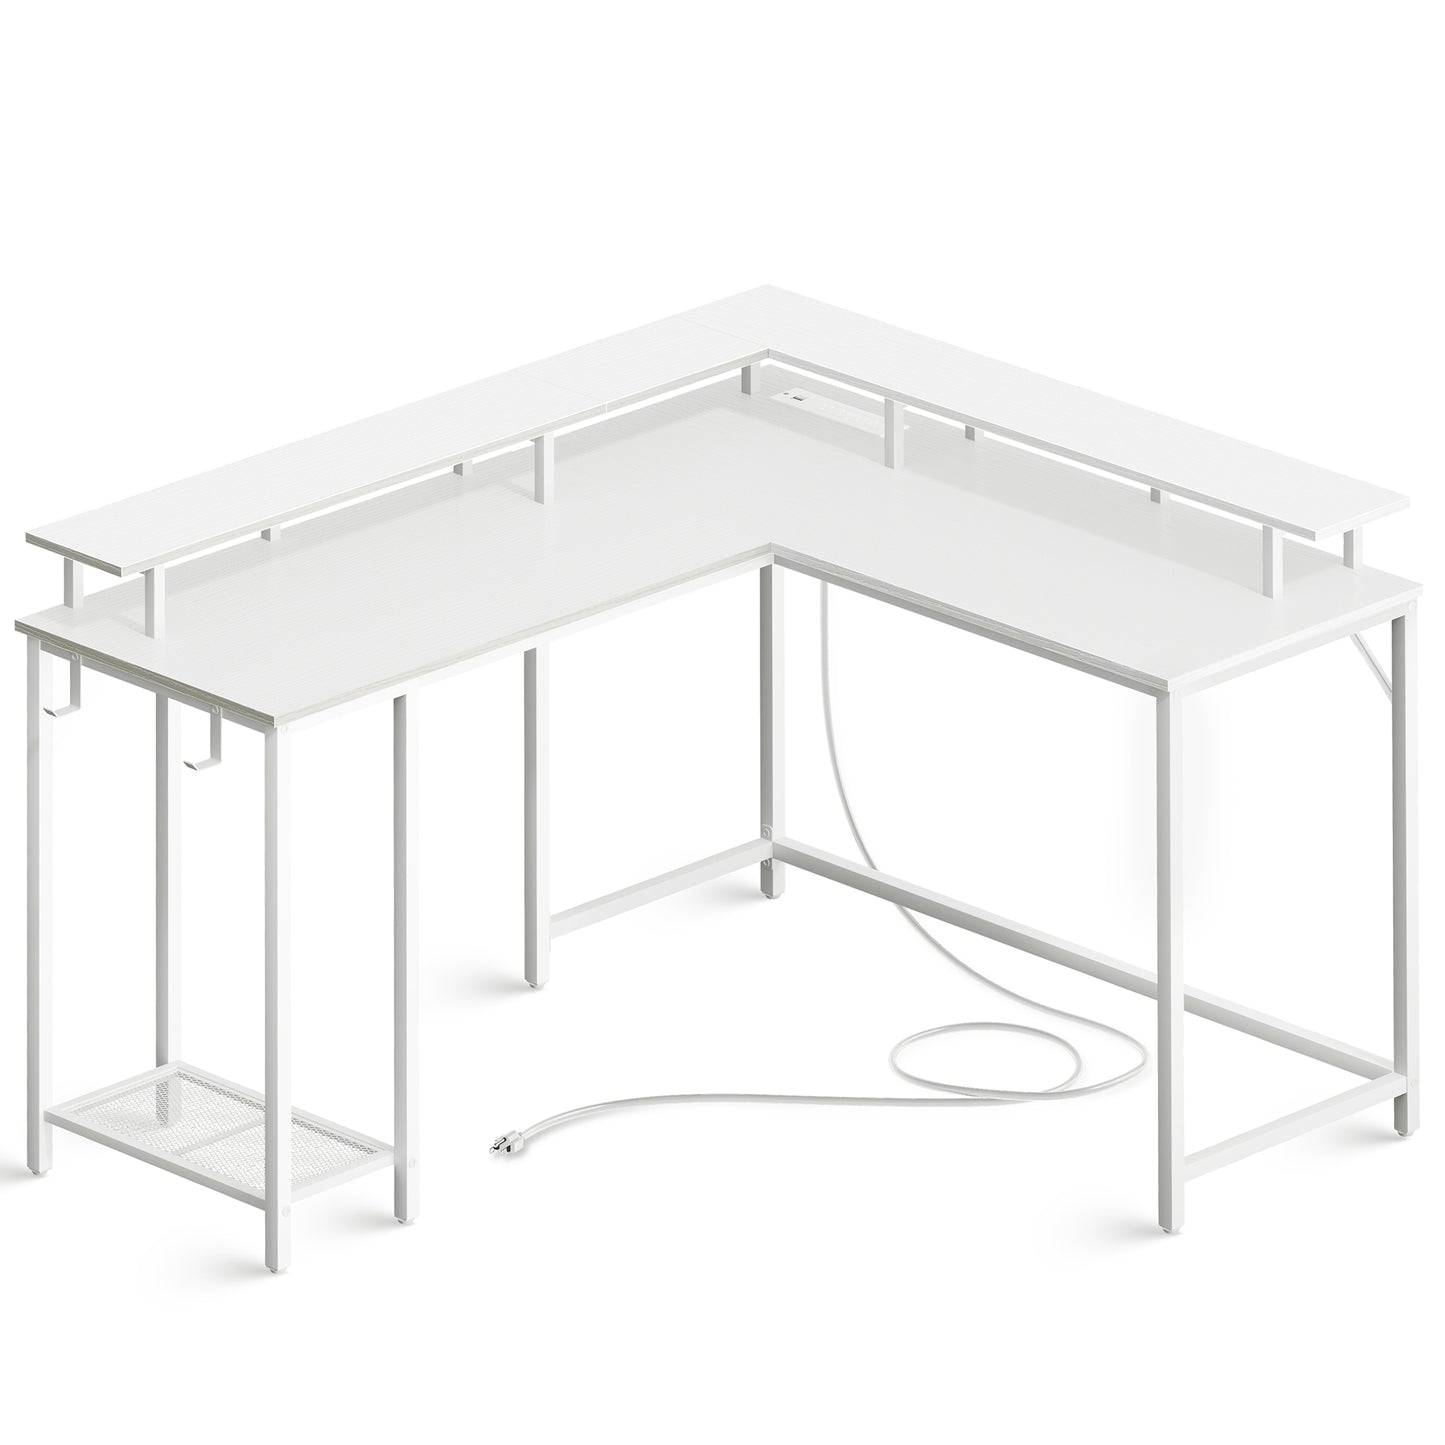 SUPERJARE L Shaped Computer Desk with Power Outlets & LED Lights, Gaming Desk with Monitor Stand & Storage Shelf, Hooks, White